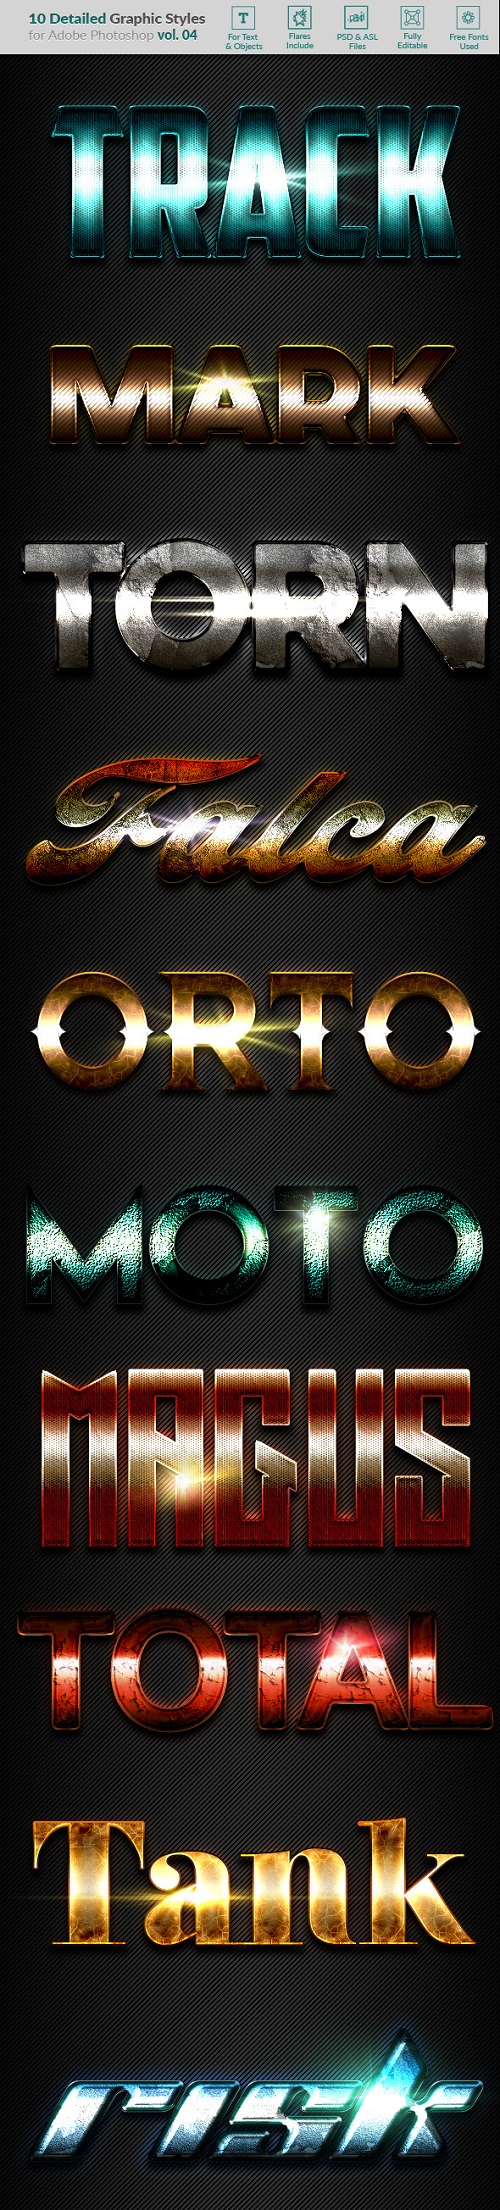 10 Text Effects Vol. 04 - 19872371